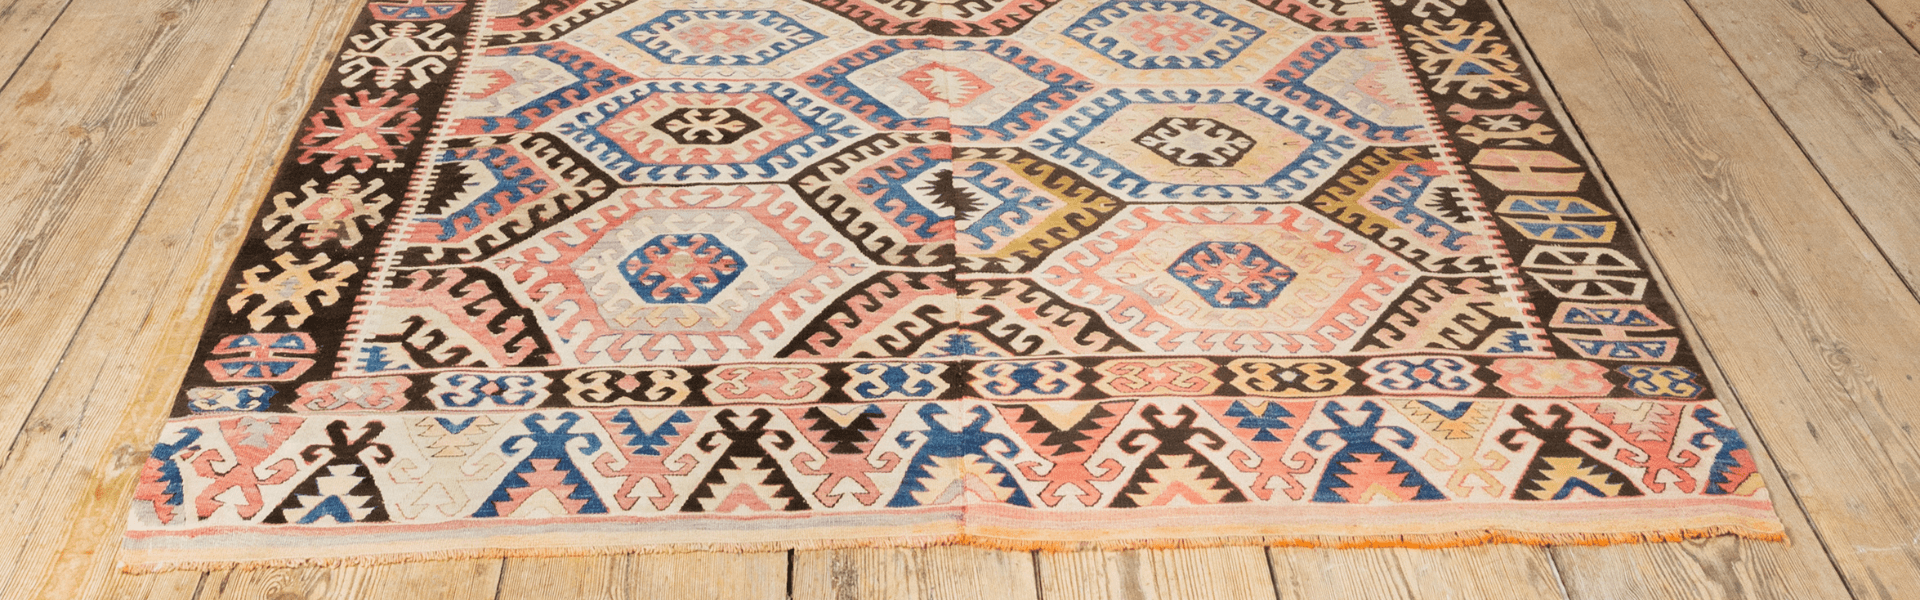 Rare Kilims by Mutte Storm